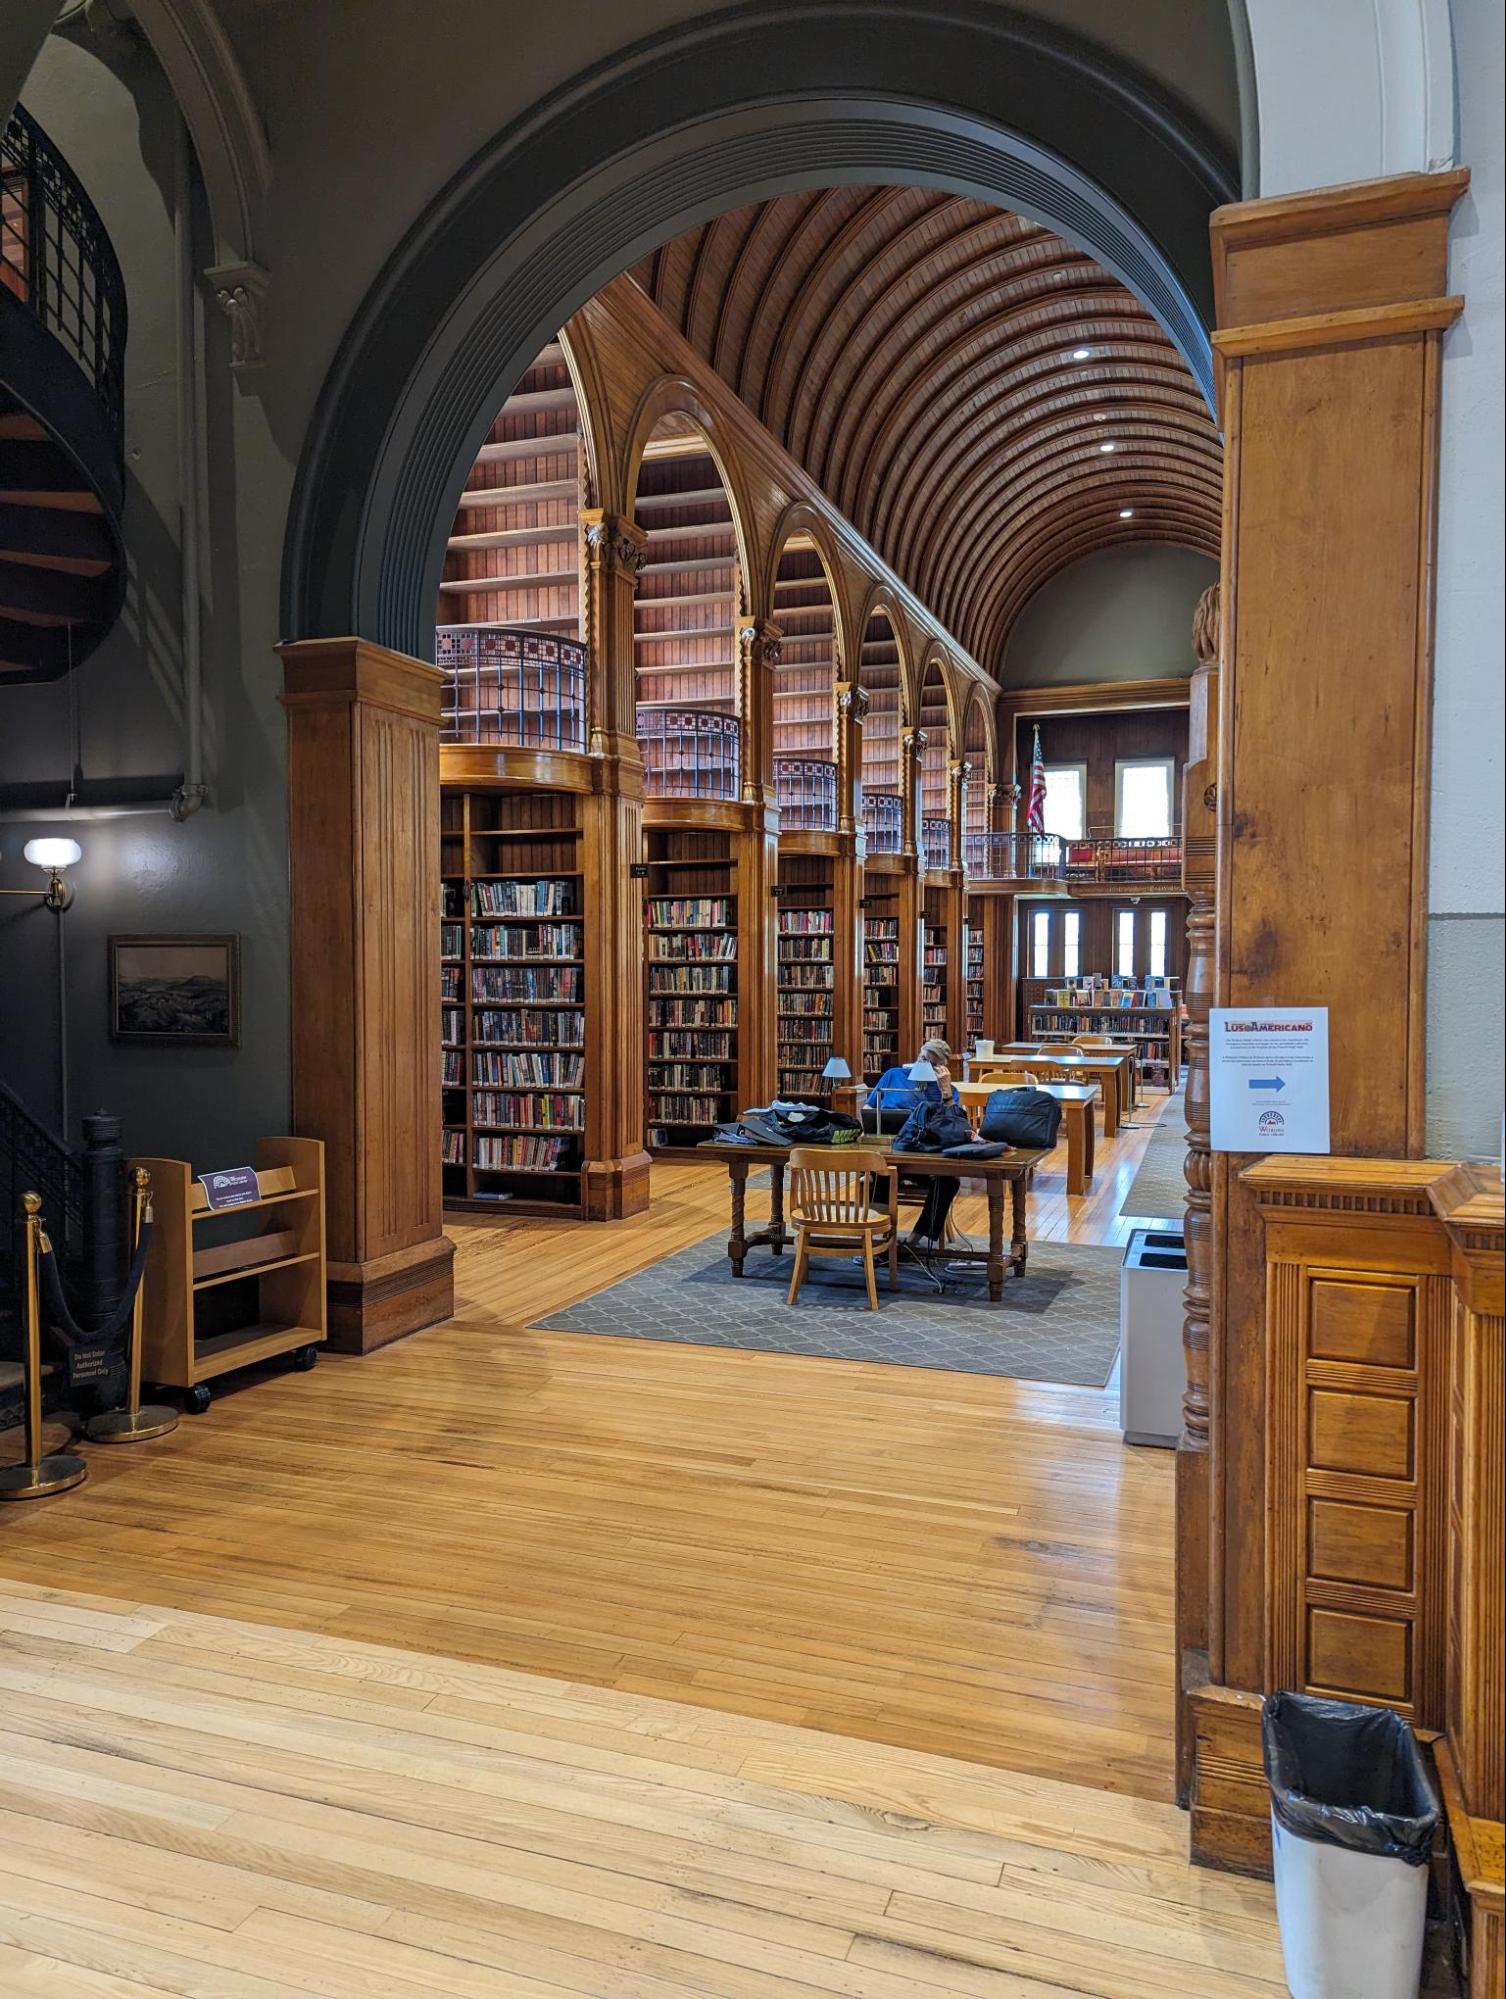 California-lawyers-envy-tradition-at-Woburn-Library